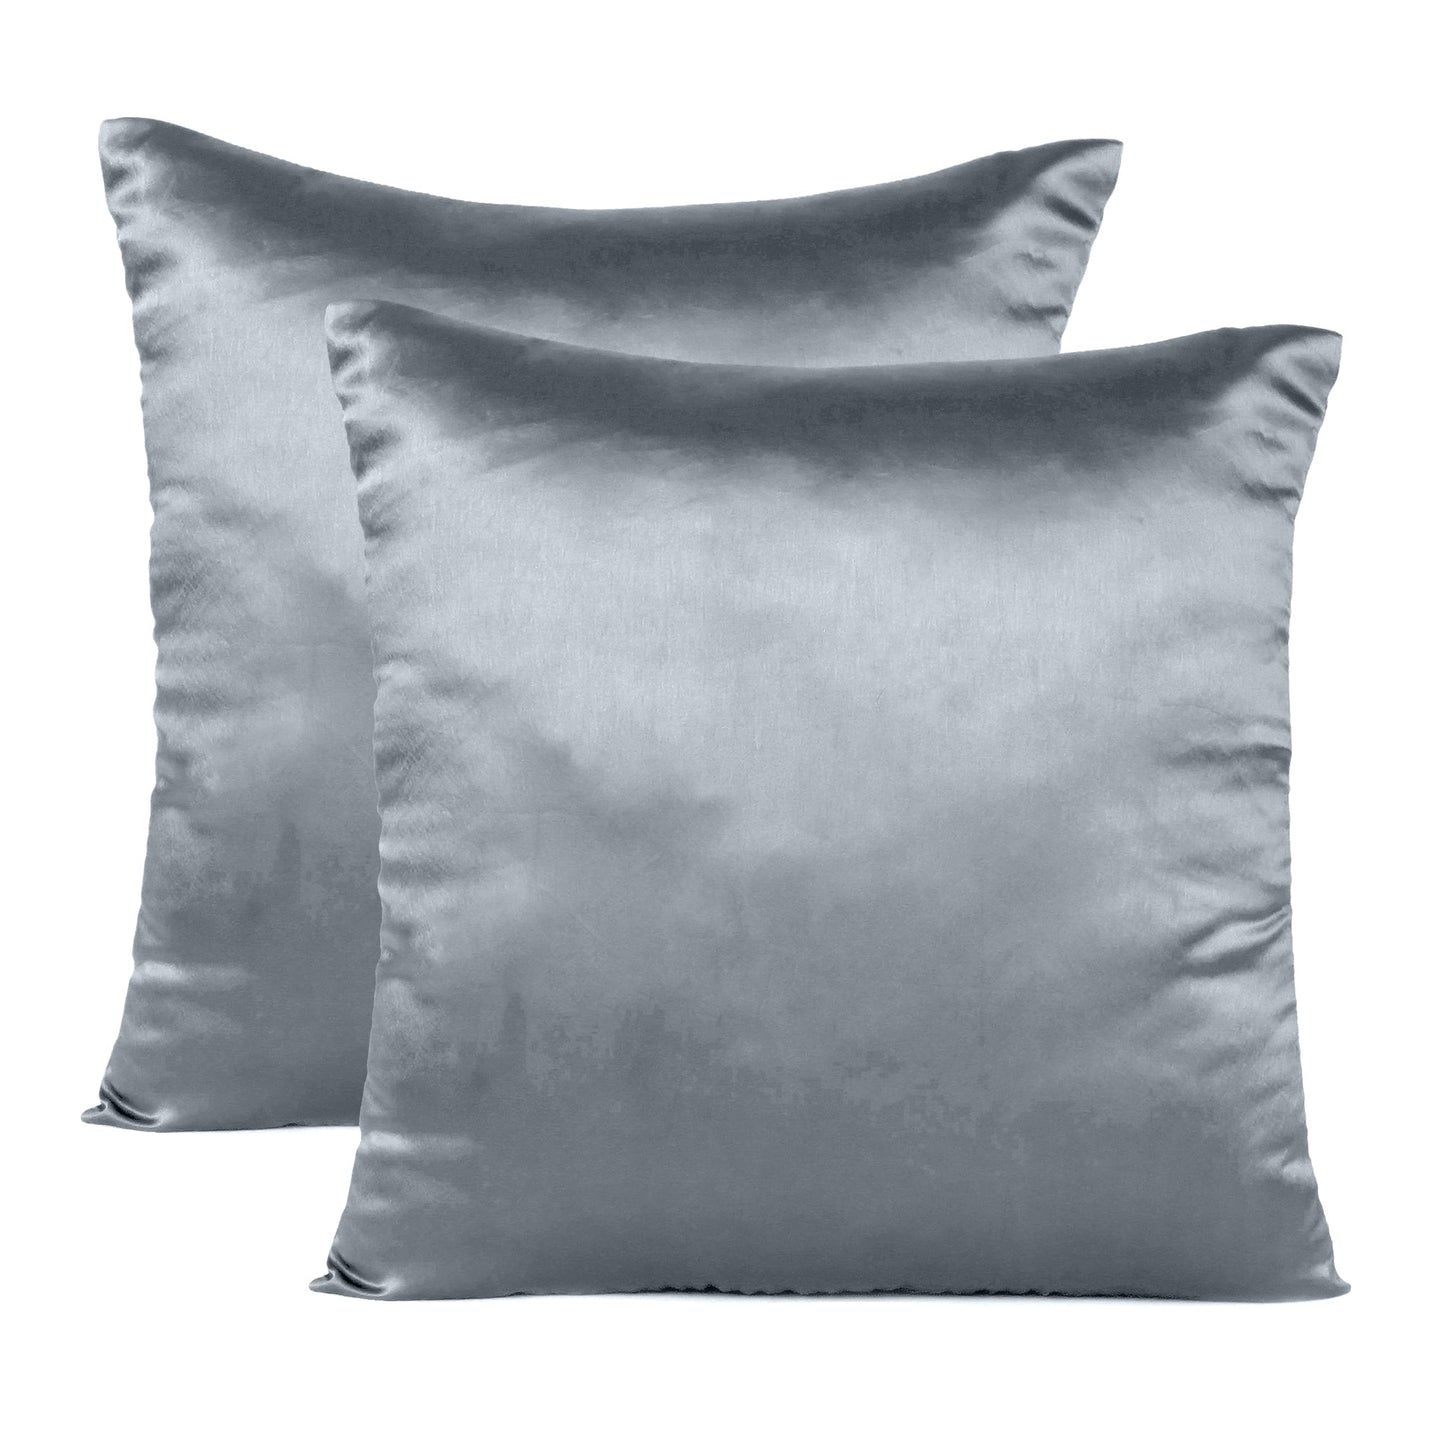 Steel Gray Satin Silky Cushion Covers in Set of 2